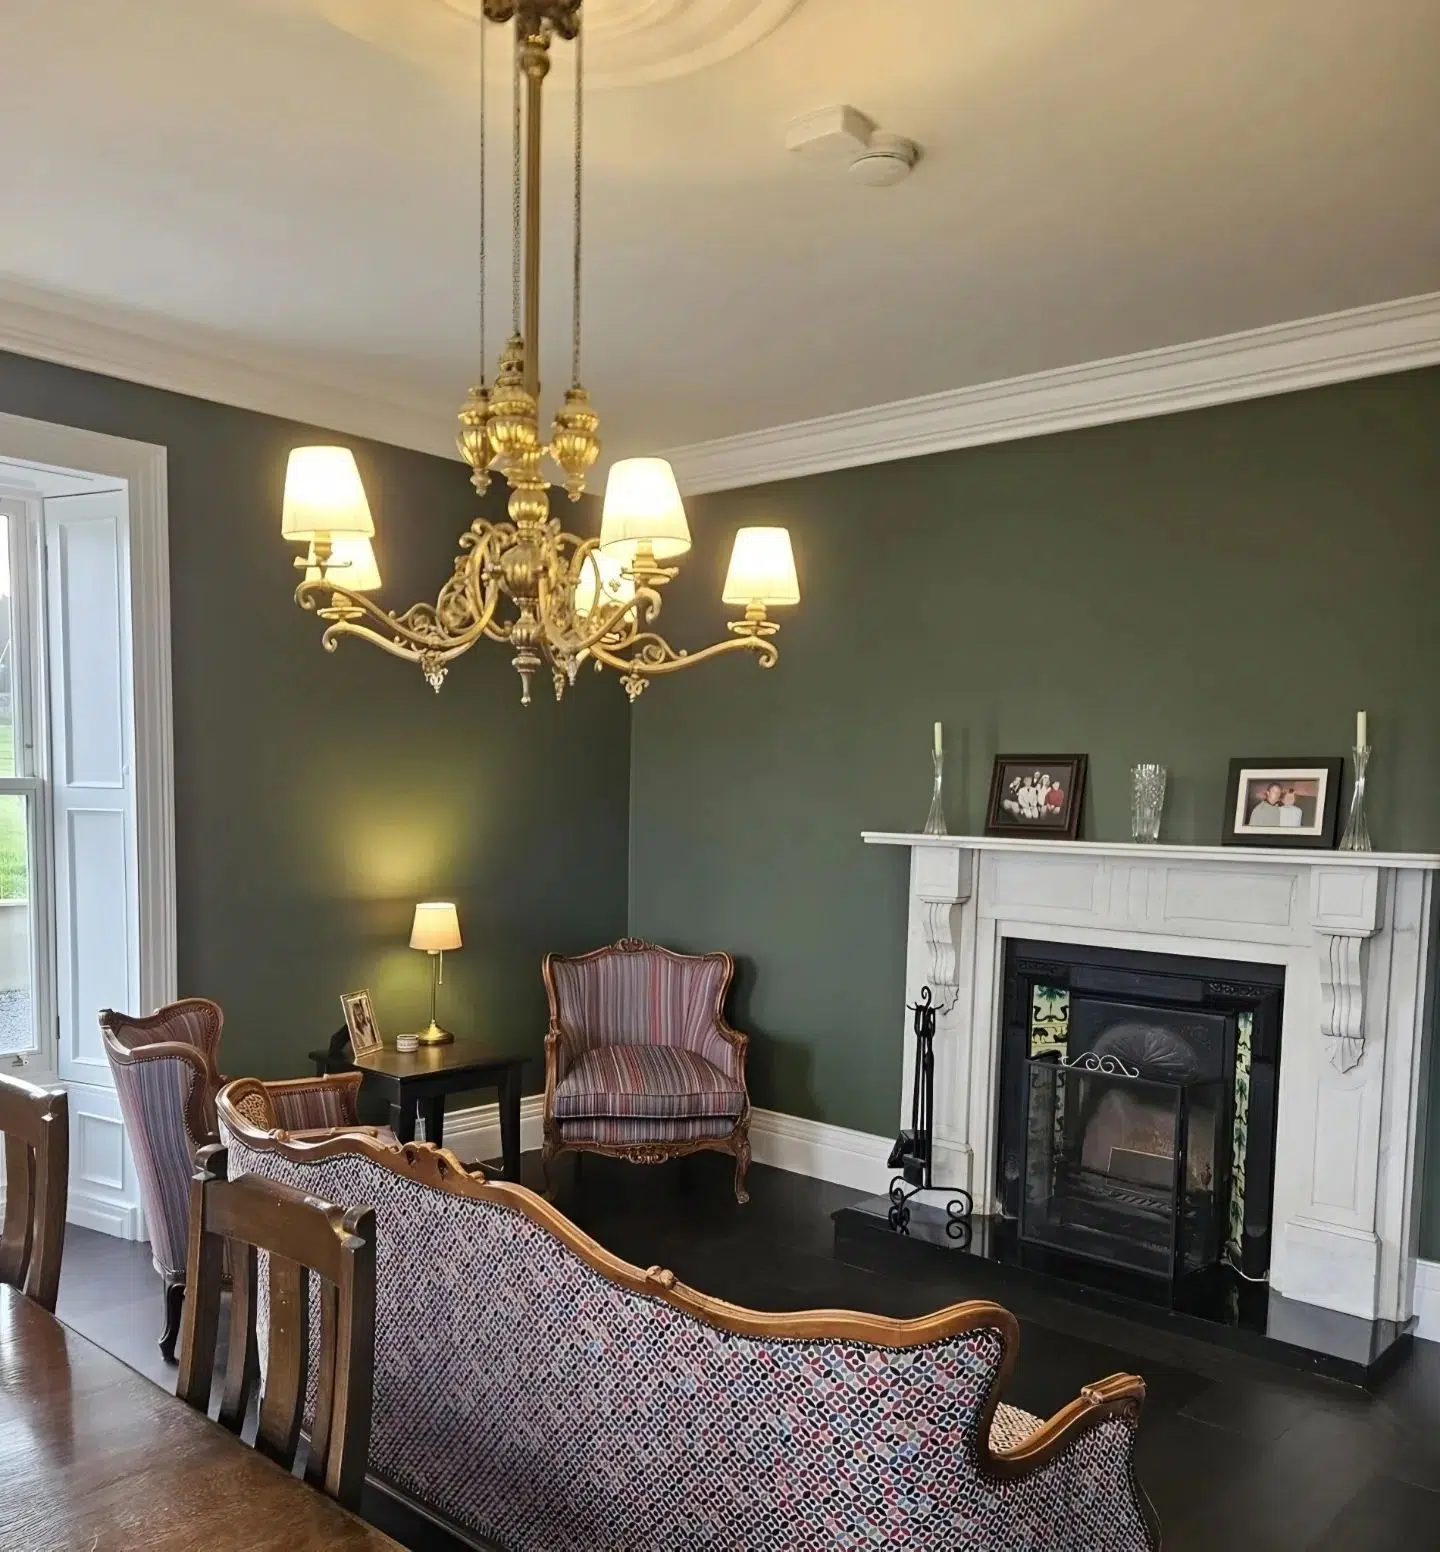 This dining room colour scheme by the brilliant Lesley @5thwallinteriors features 🎨 Bonzai N448 by @tikkurila_ireland .

An absolutely beautiful colour scheme - we love it Lesley! 👌